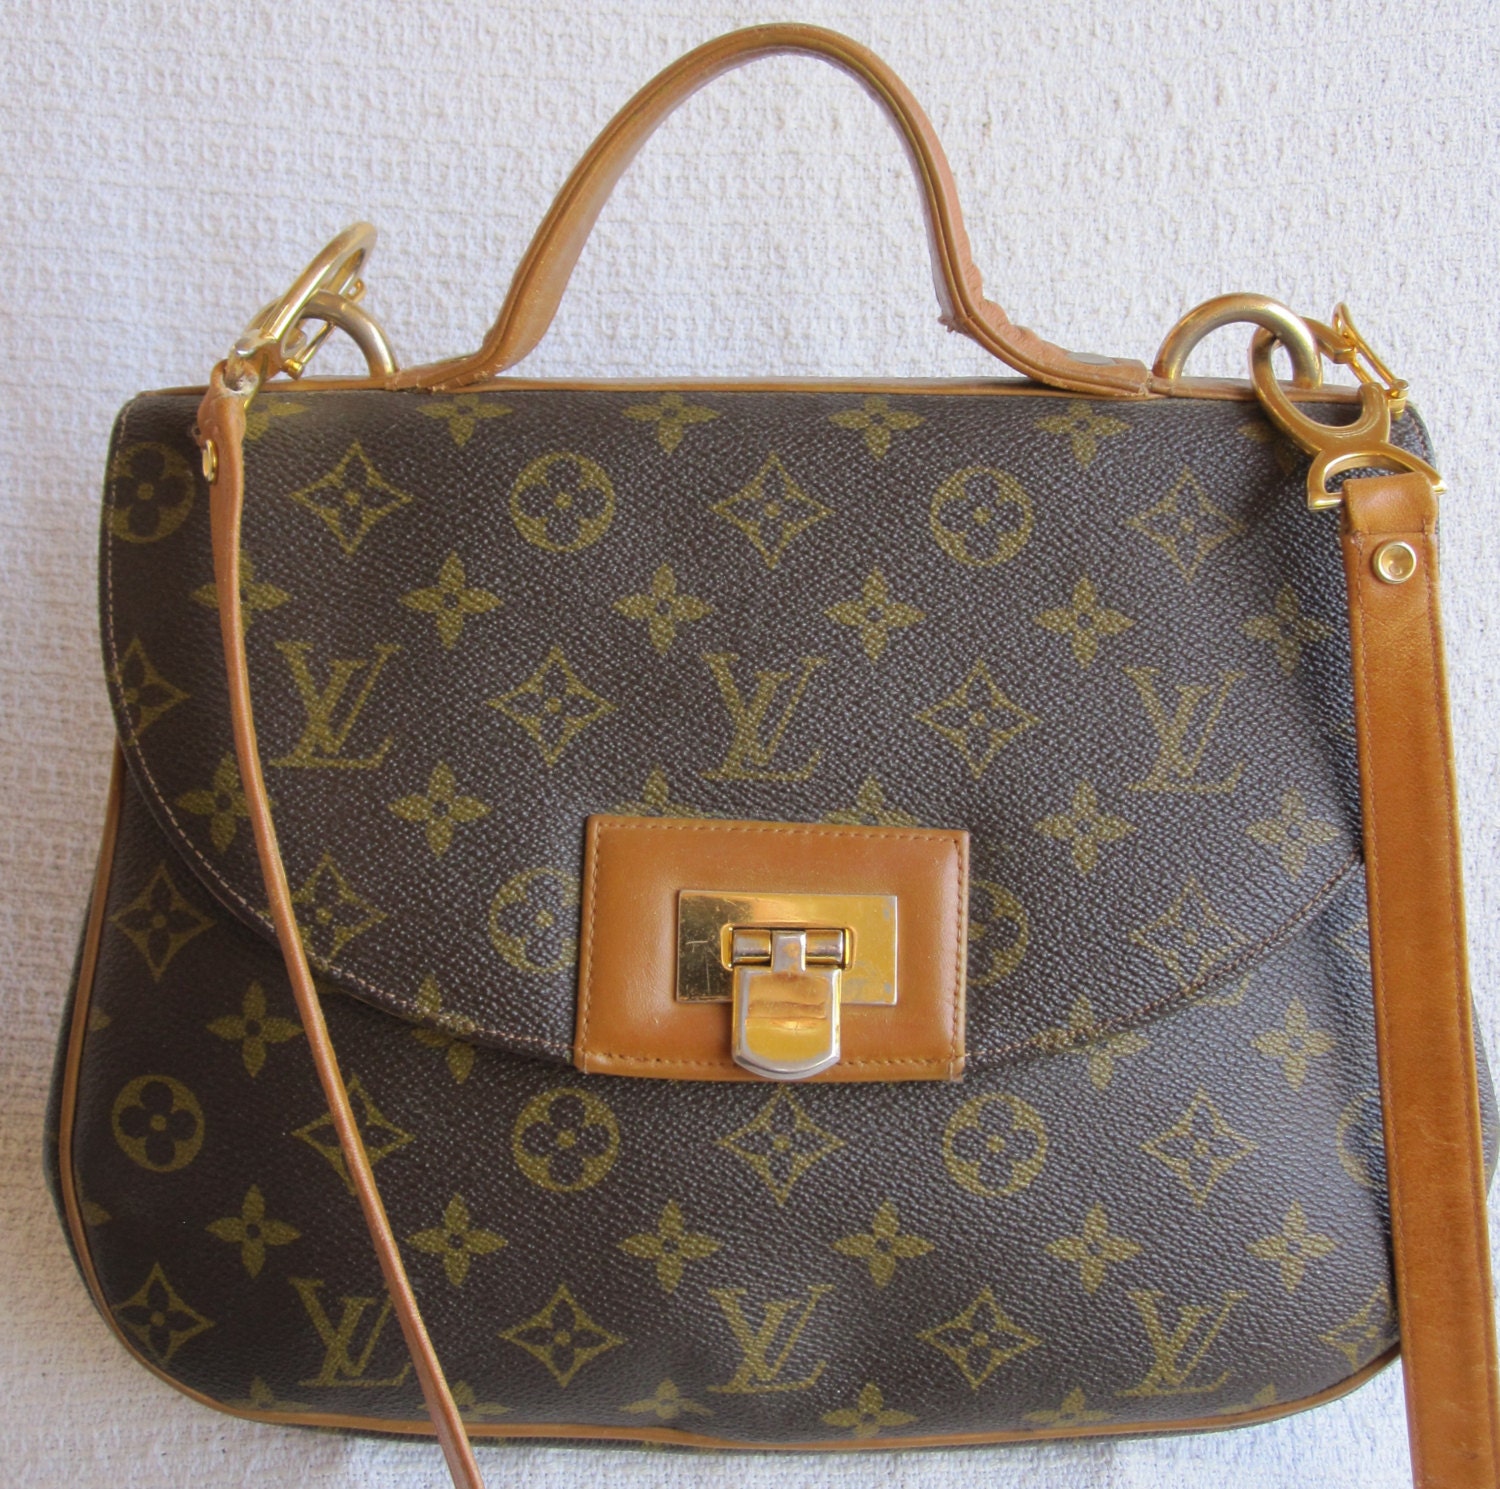 Stunning Rare Louis Vuitton vitnage french by OLDVINTAGESTOP